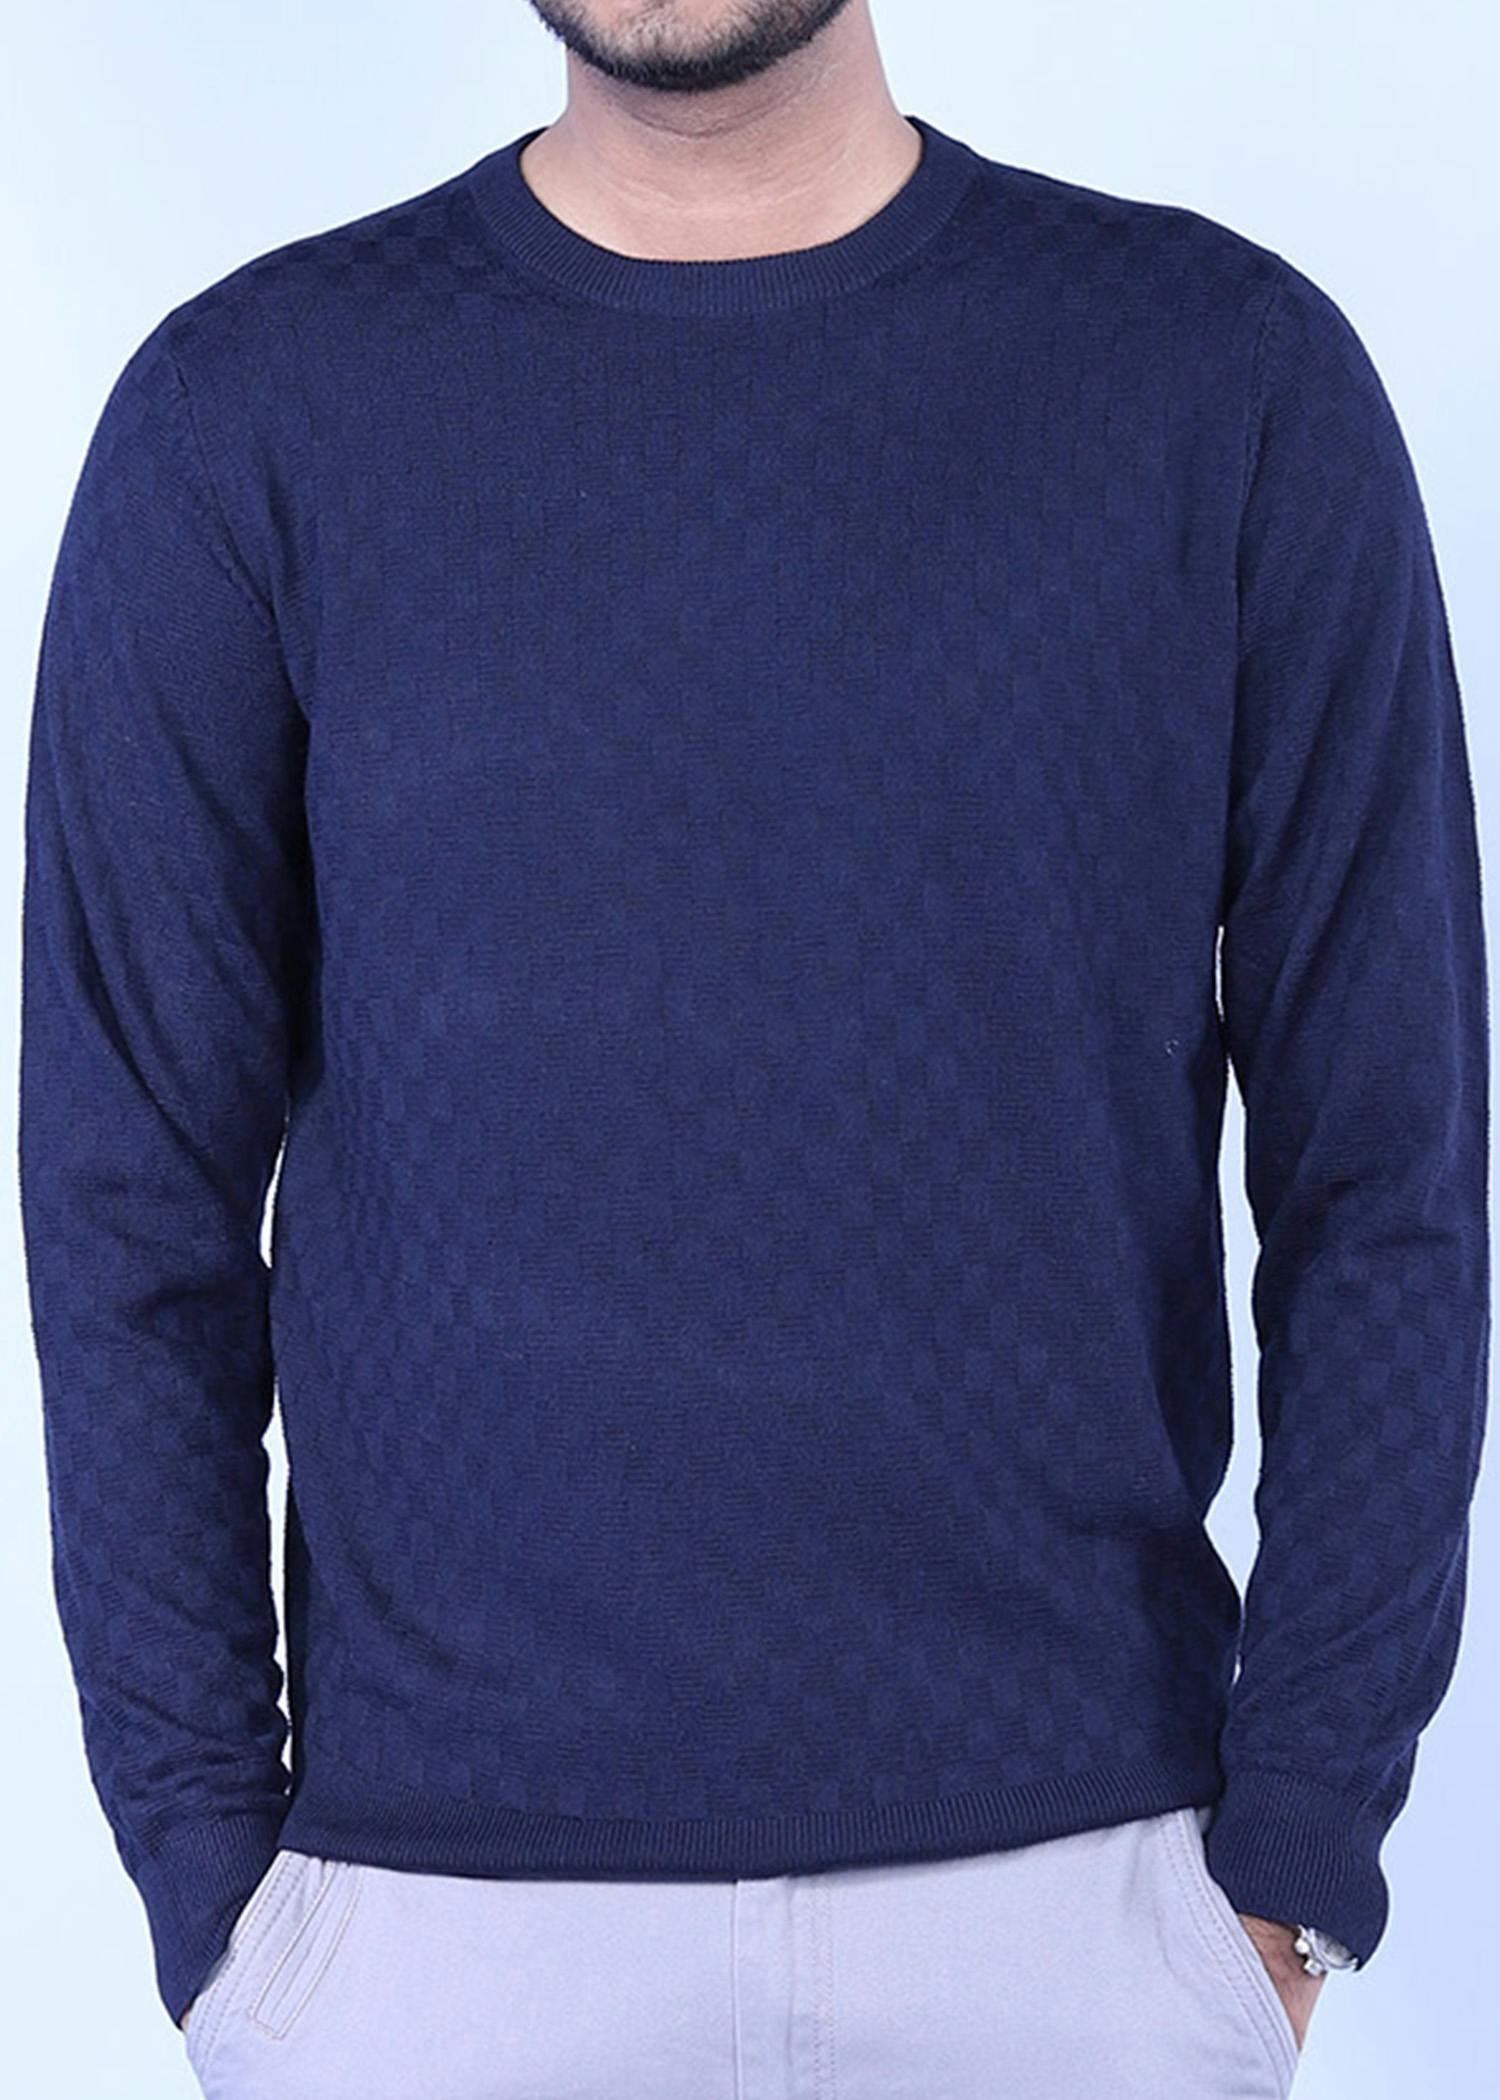 hillstar vii sweater navy color head cropped